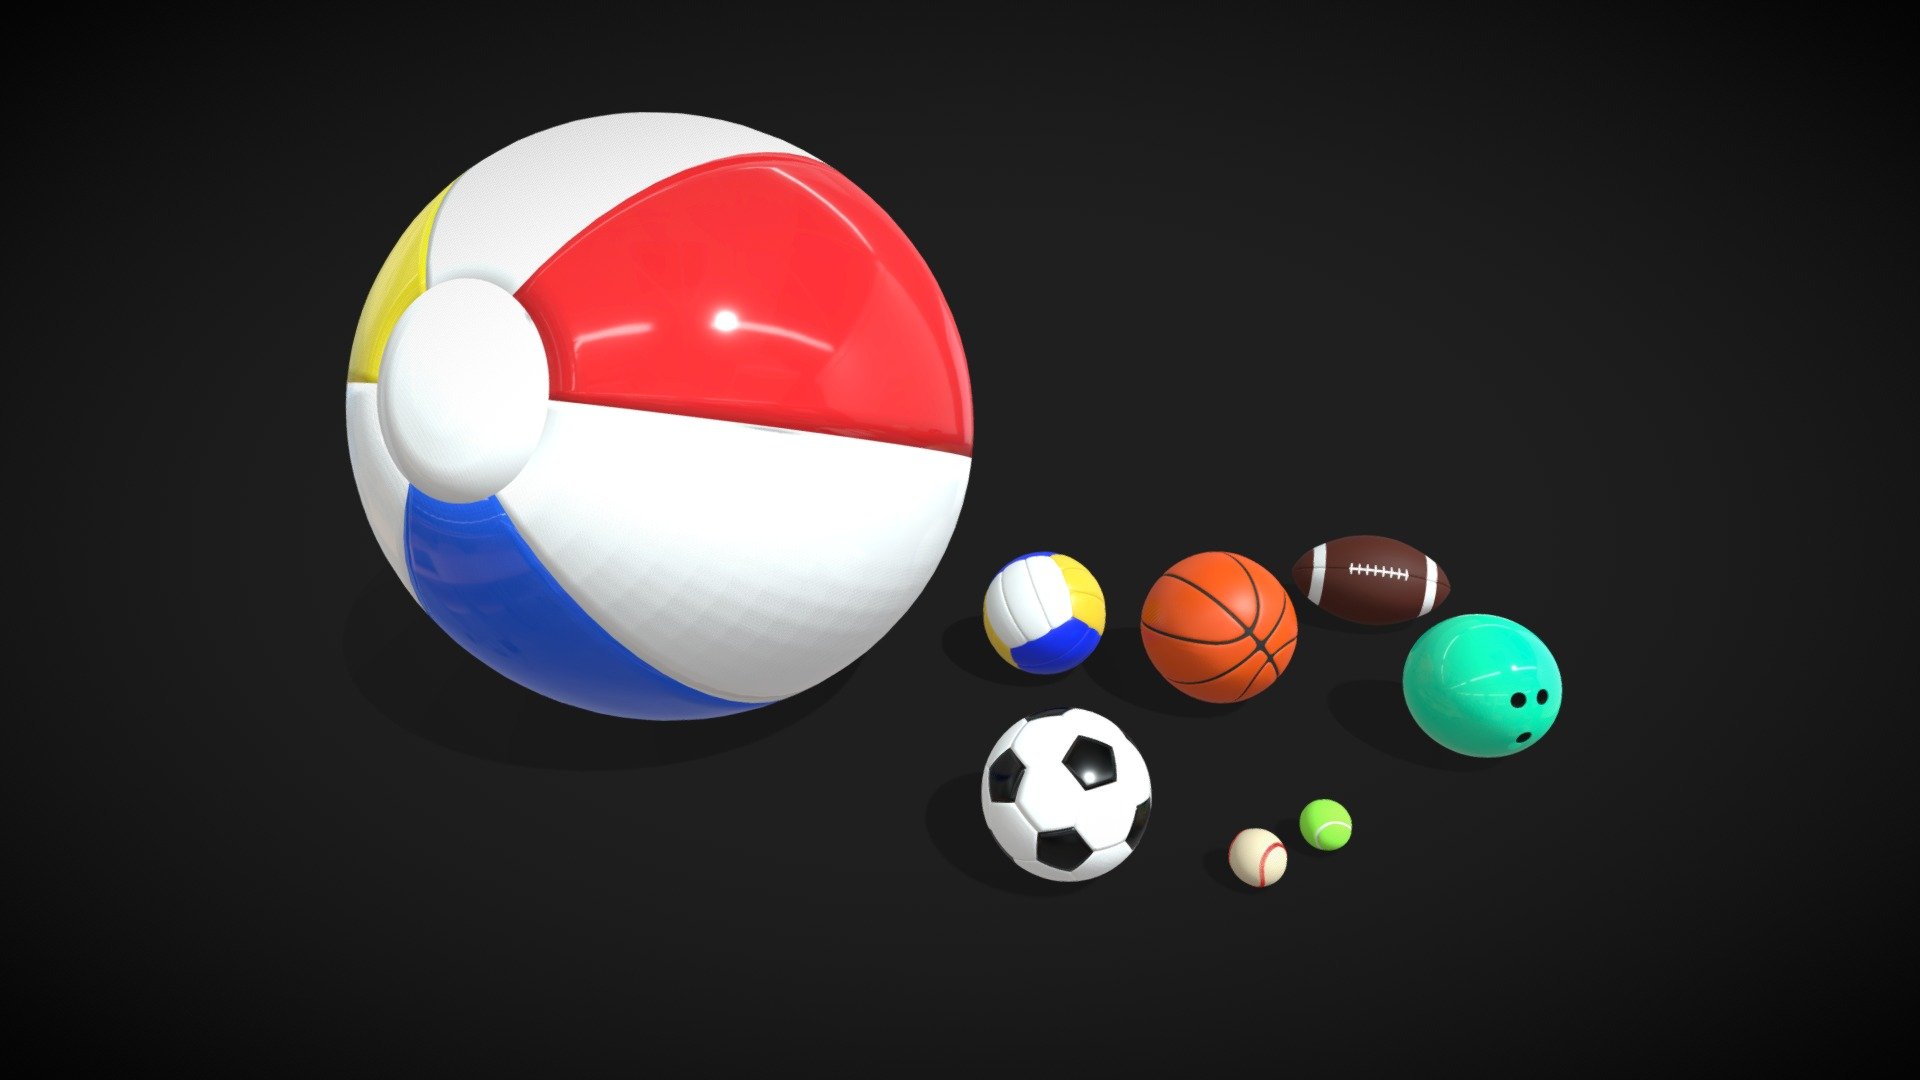 8 game ready, fairly low poly:


Beach ball
Soccer/football ball
American football ball
Baseball ball
Tennis ball
Volleyball ball
Bowling ball
Basketball ball

All designed with correct and offical sizes 3d model